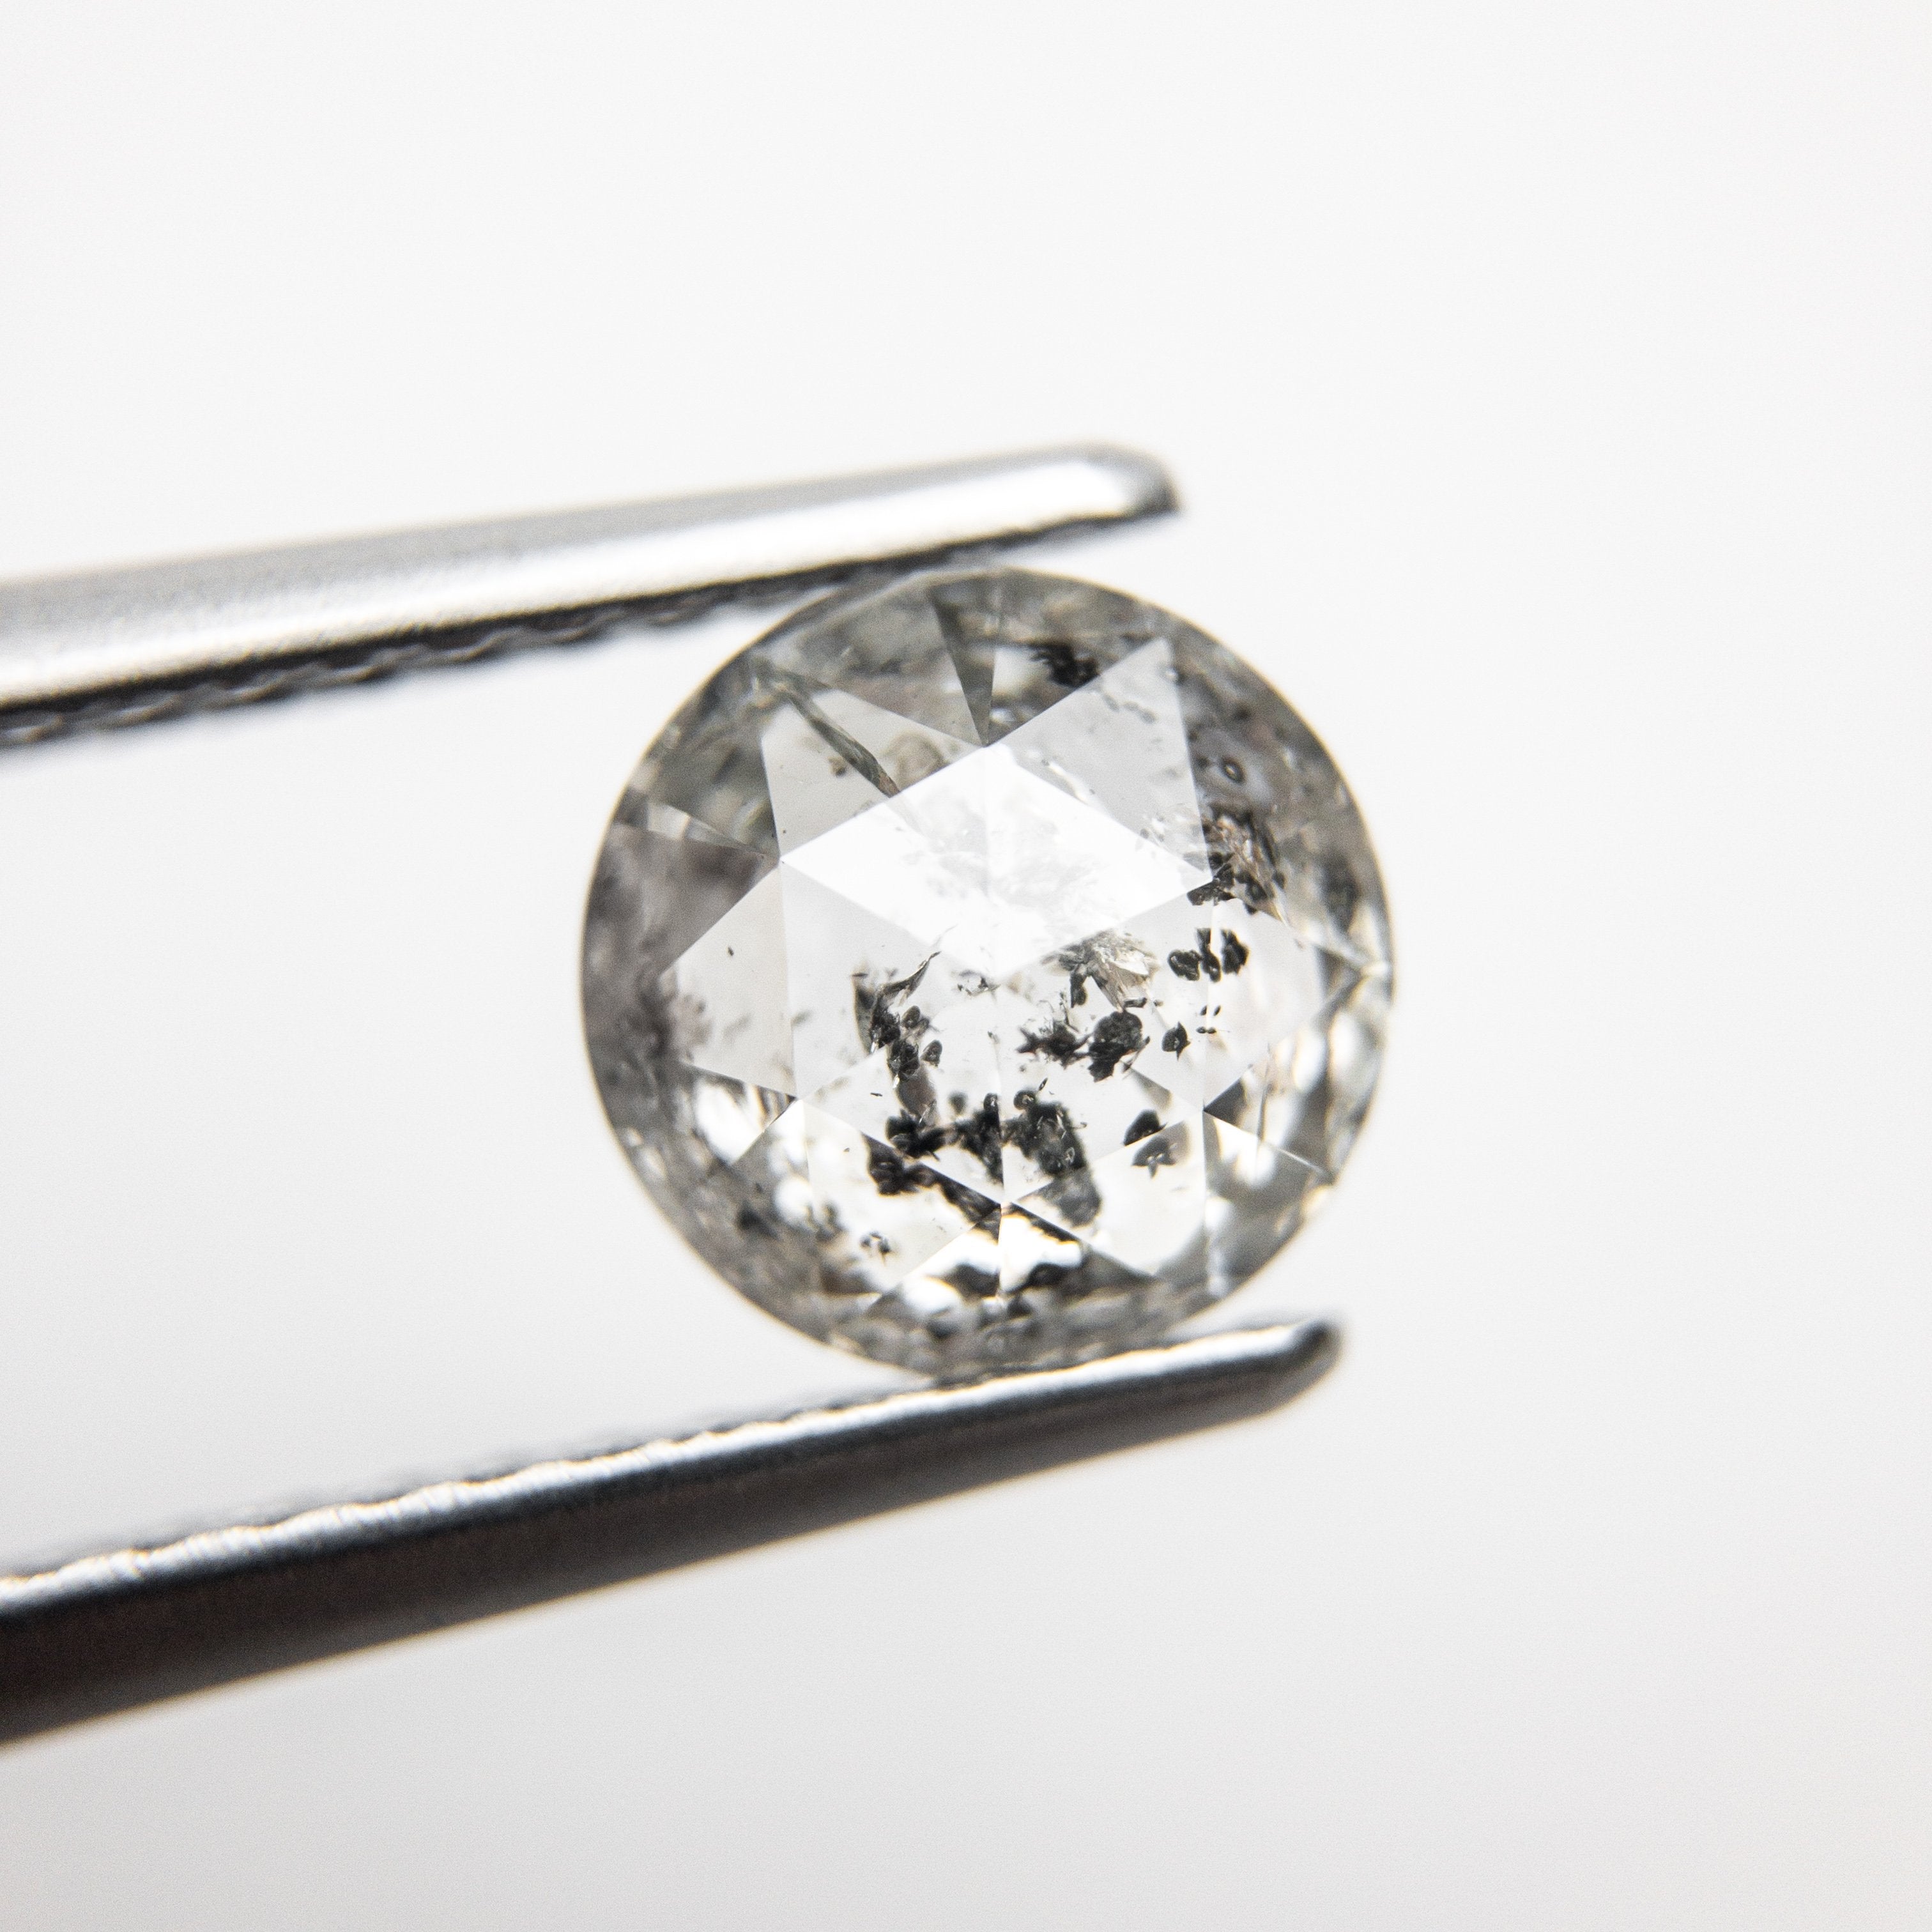 1.27ct 6.83x6.79x3.45mm Round Double Cut 18094-23